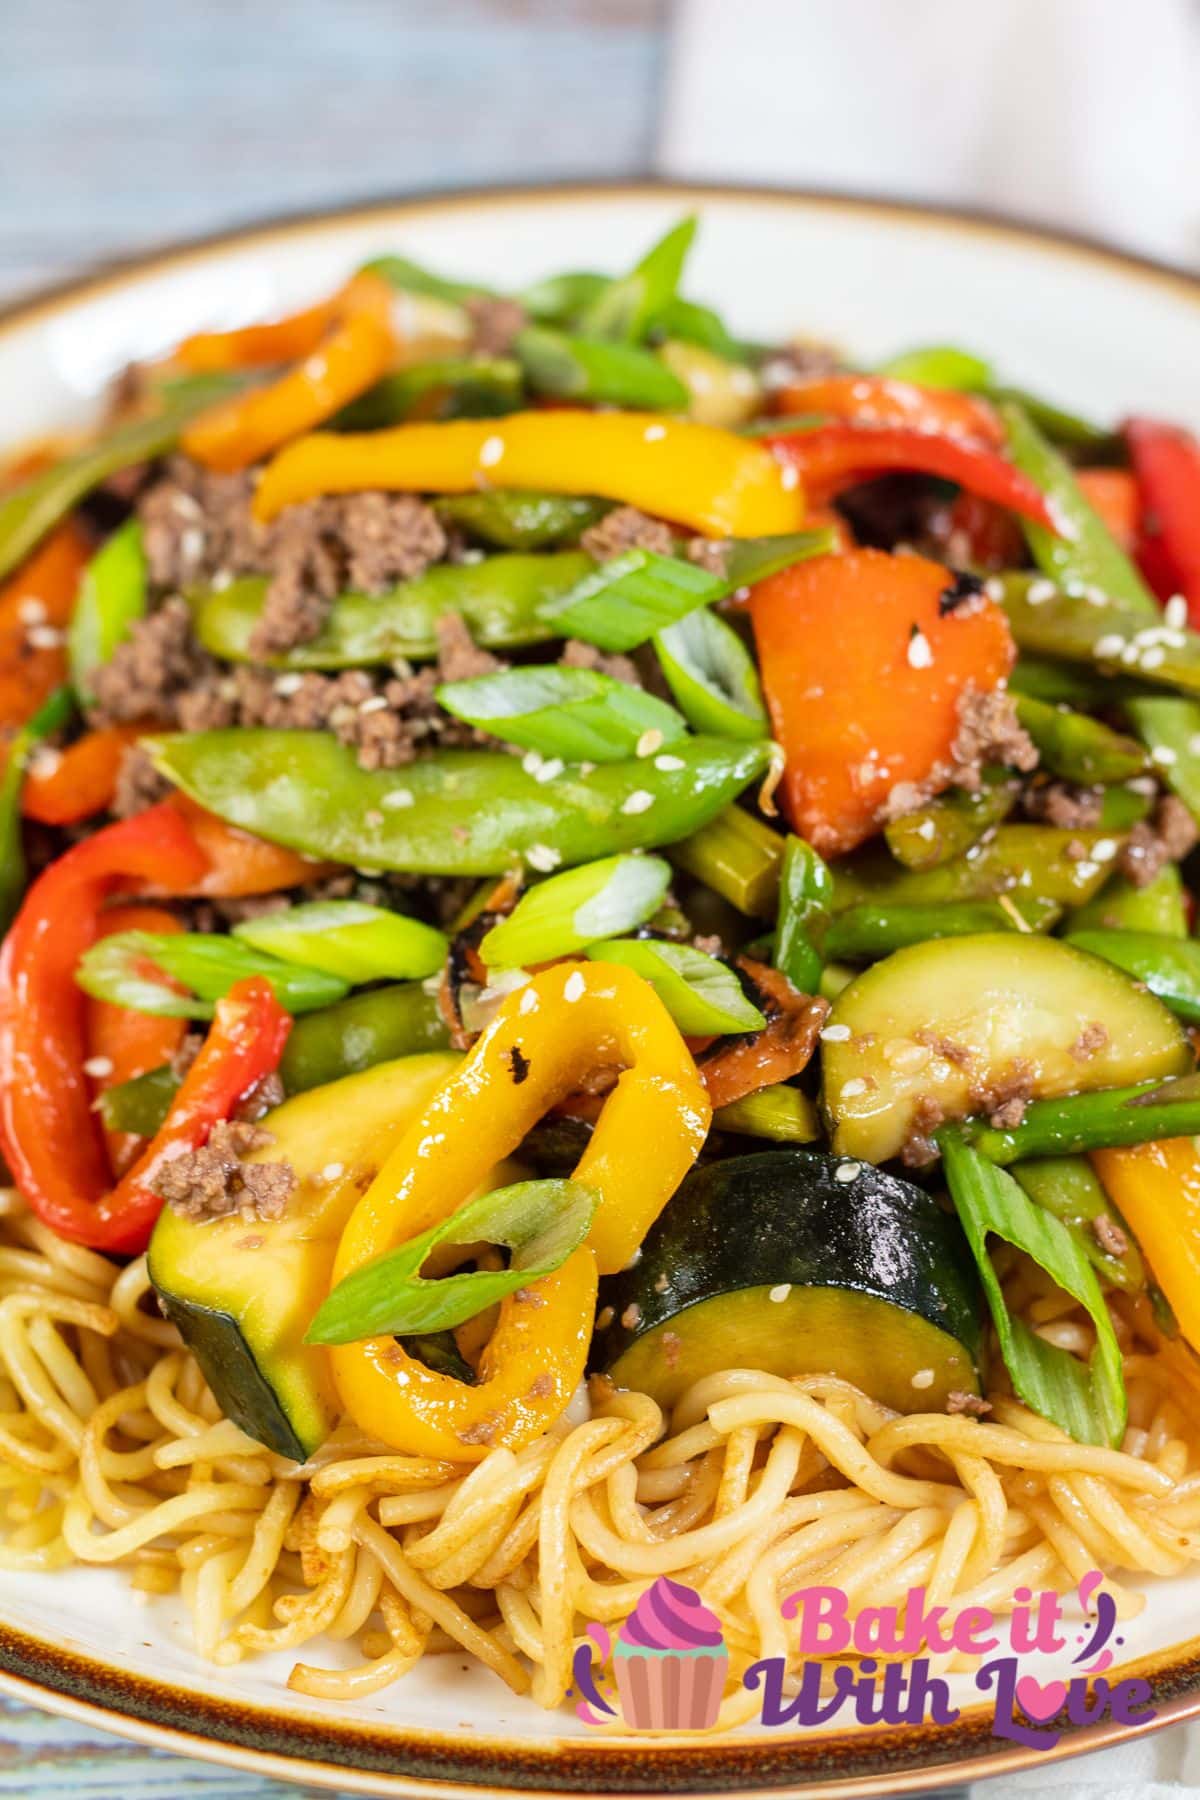 Tall image showing ground beef stir fry with noodles.